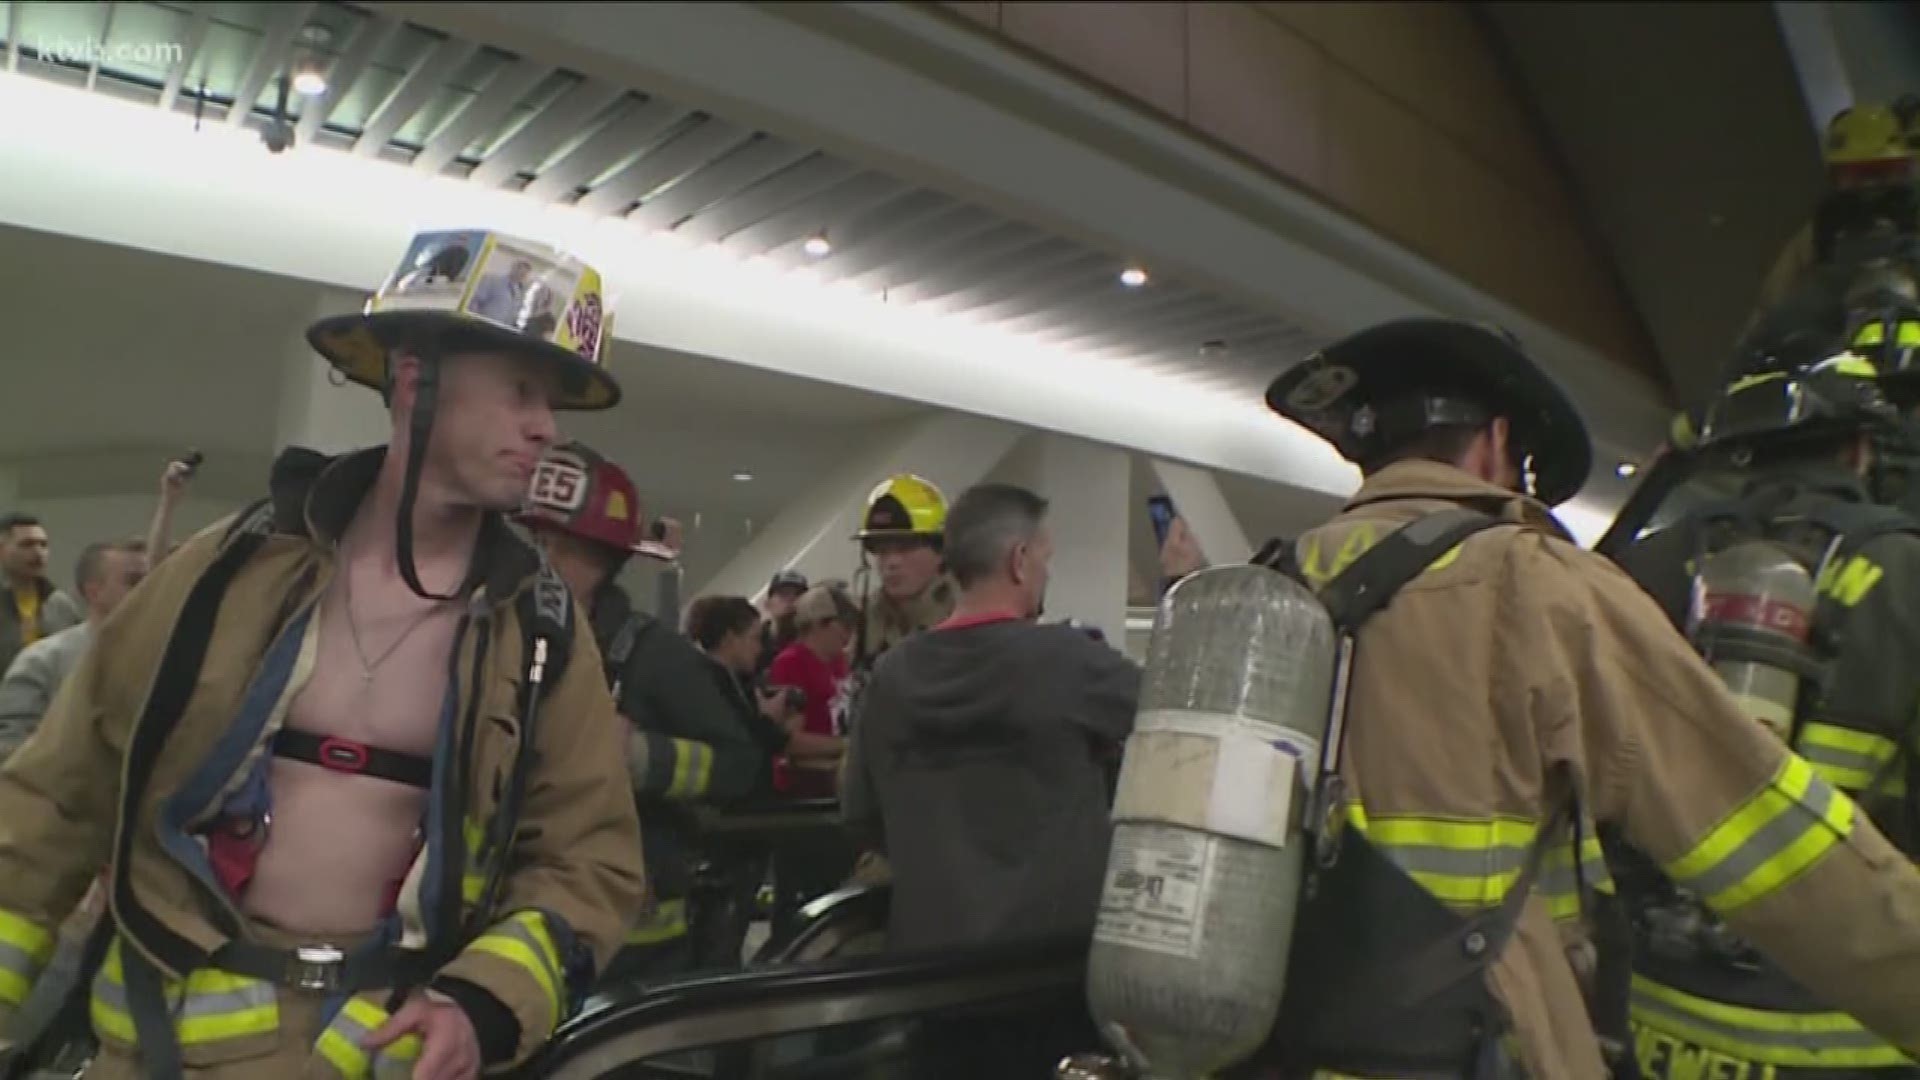 The 28th Annual Firefighter Stairclimb saw 2,200 firefighters gear up and climb to raise money for the Leukemia and Lymphoma Society.